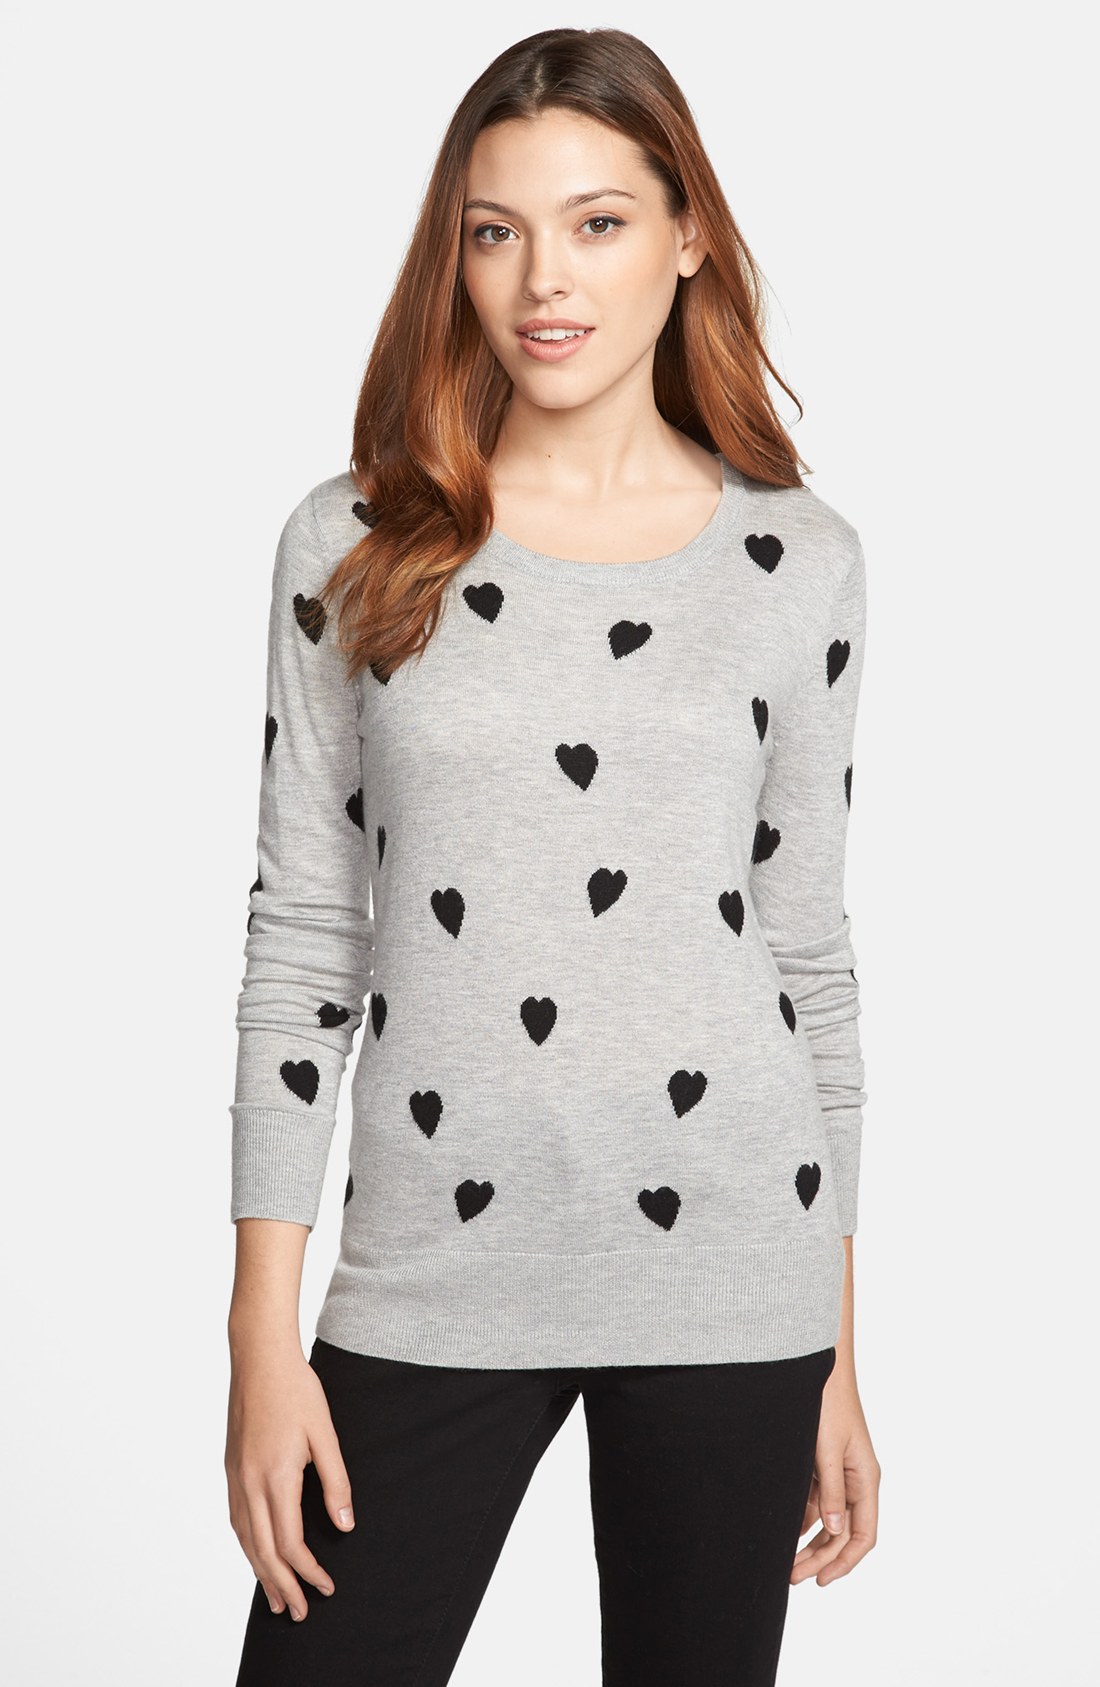 Only Mine Hearts Intarsia Sweater in Gray (Grey/ Black) | Lyst